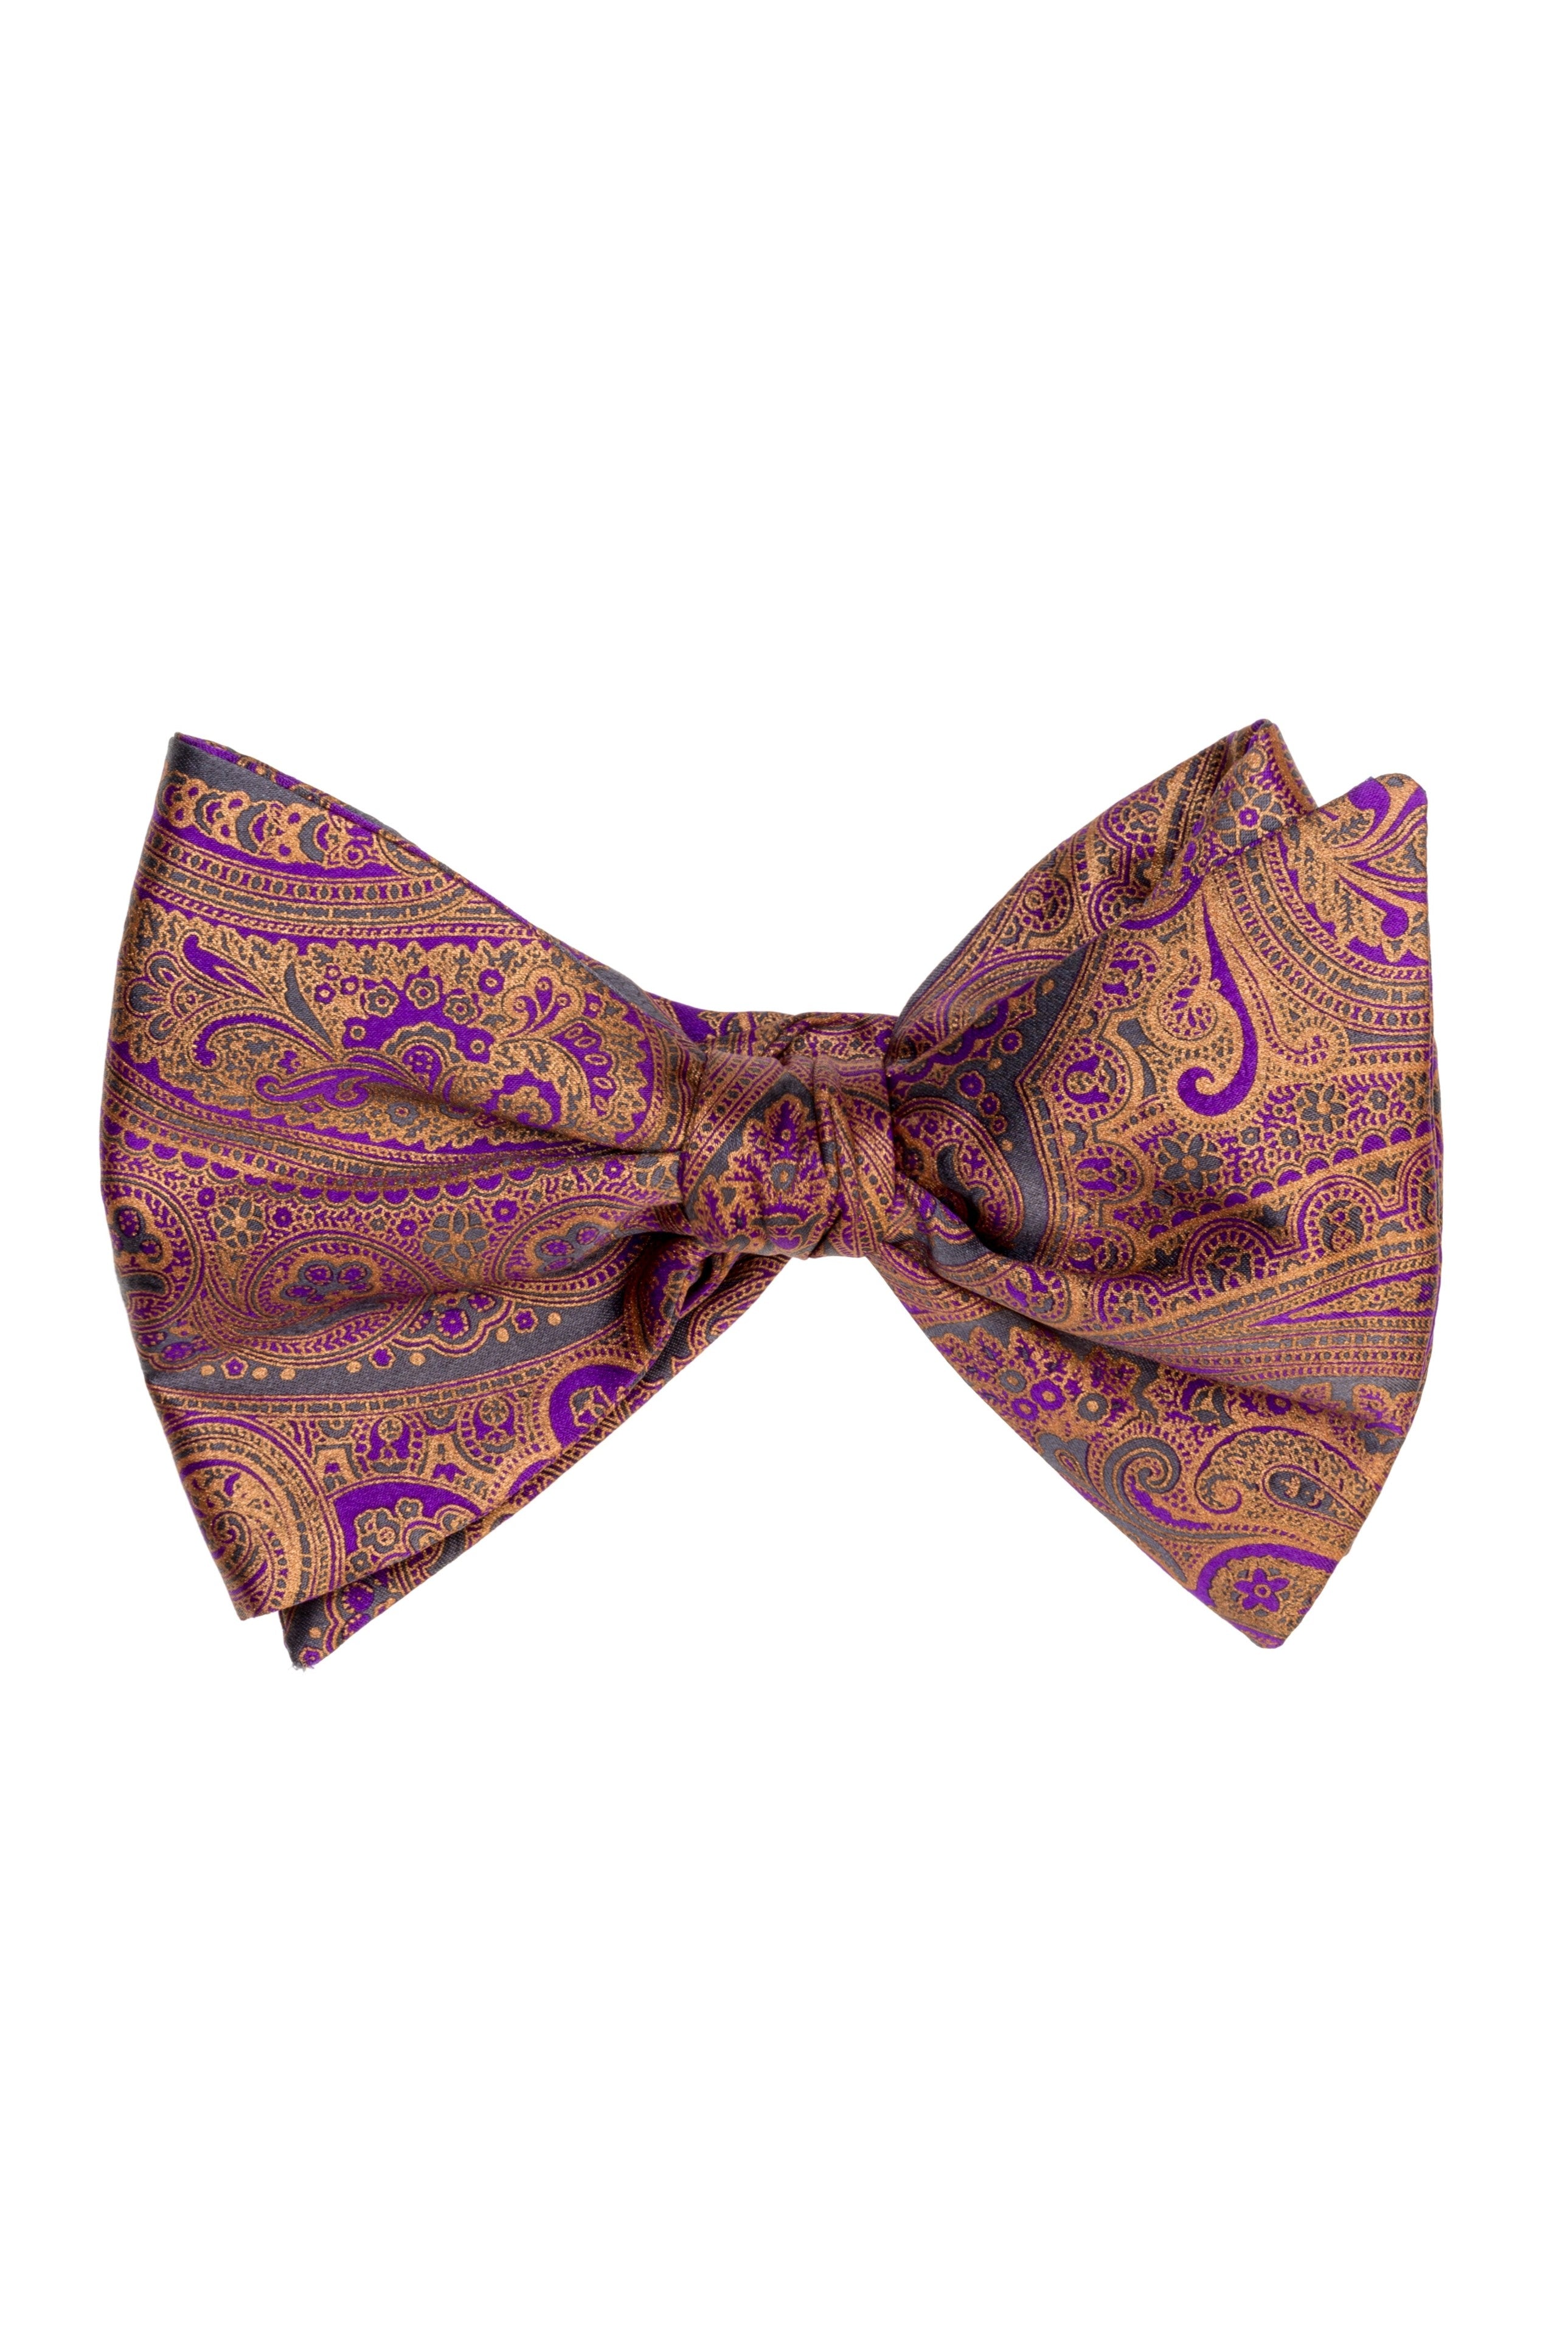 Fly Purple Paisley Bow-Tie - Traditional Hand Print